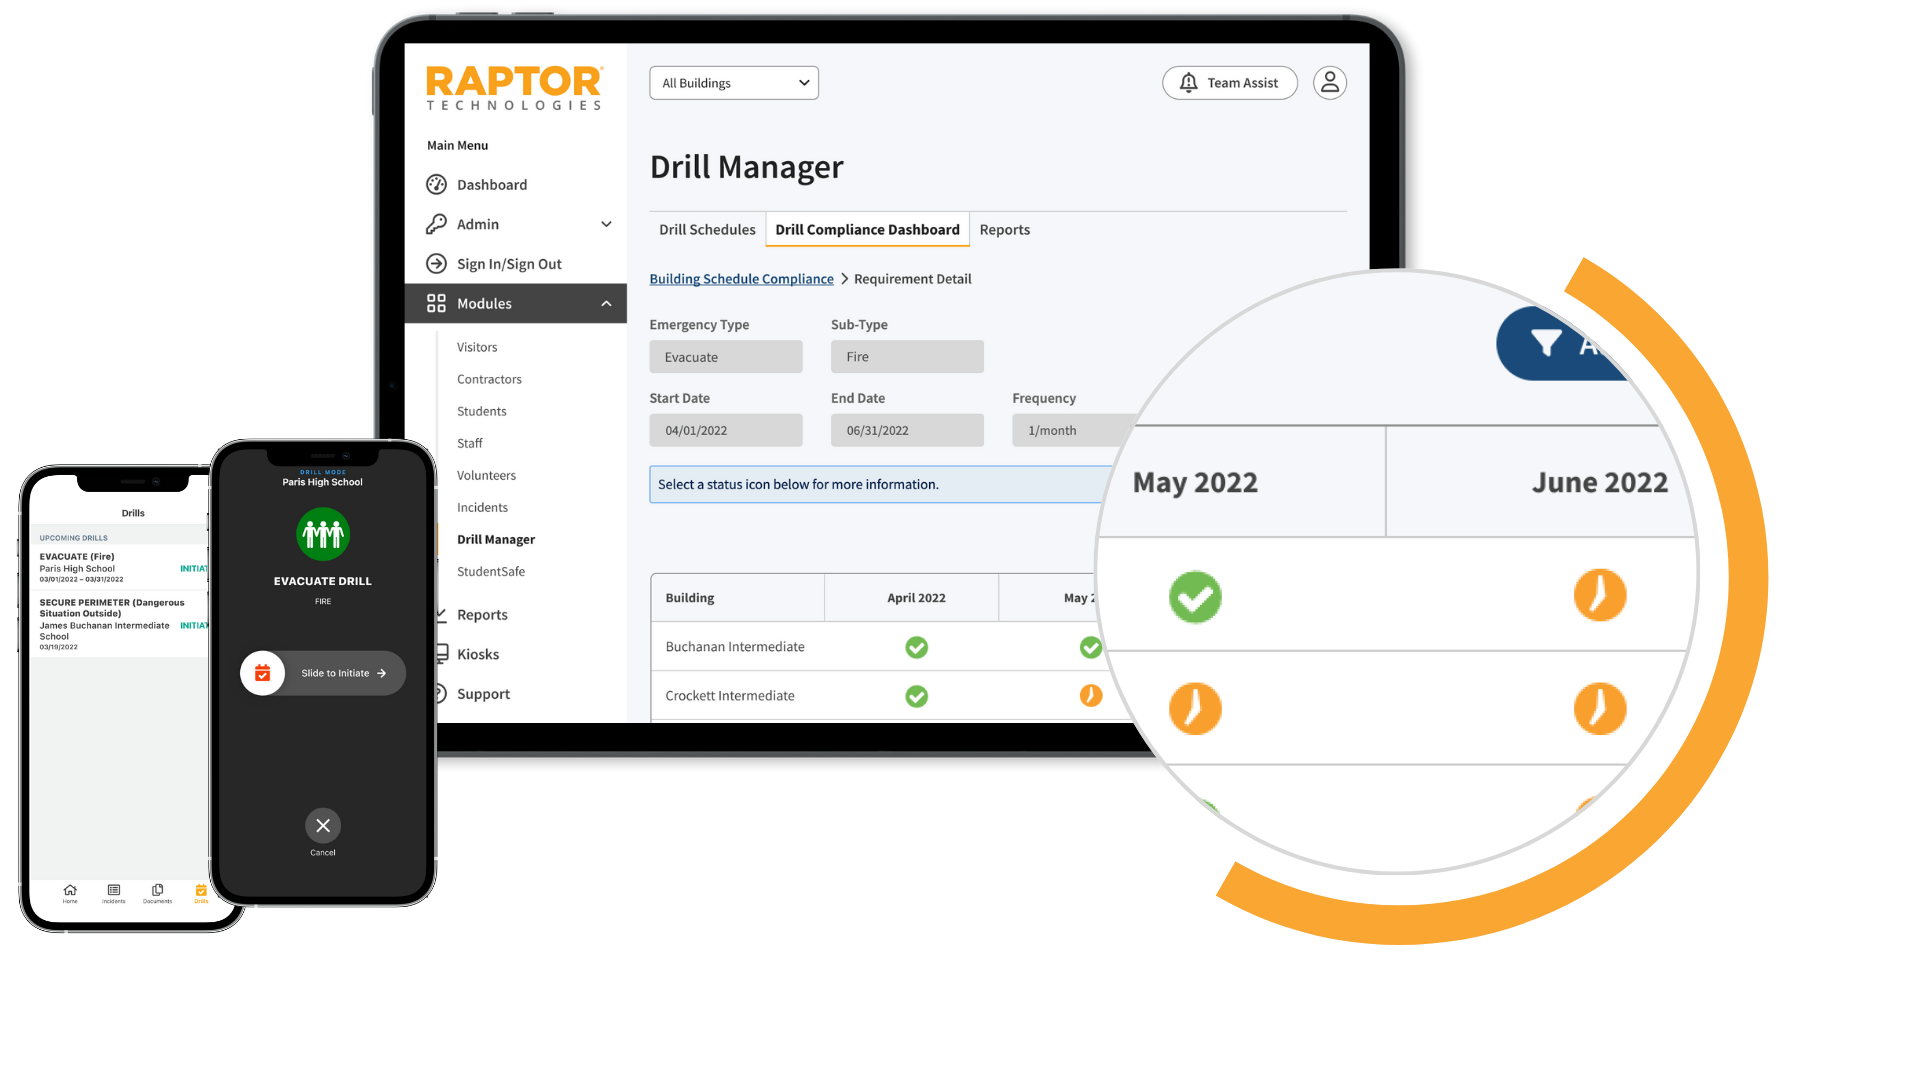 Raptor Drill Manager empowers teachers, students, and staff to confidently respond to any emergency. Districts/Schools can schedule and manage drills; track compliance; and analyze reports to see where they need to improve. 